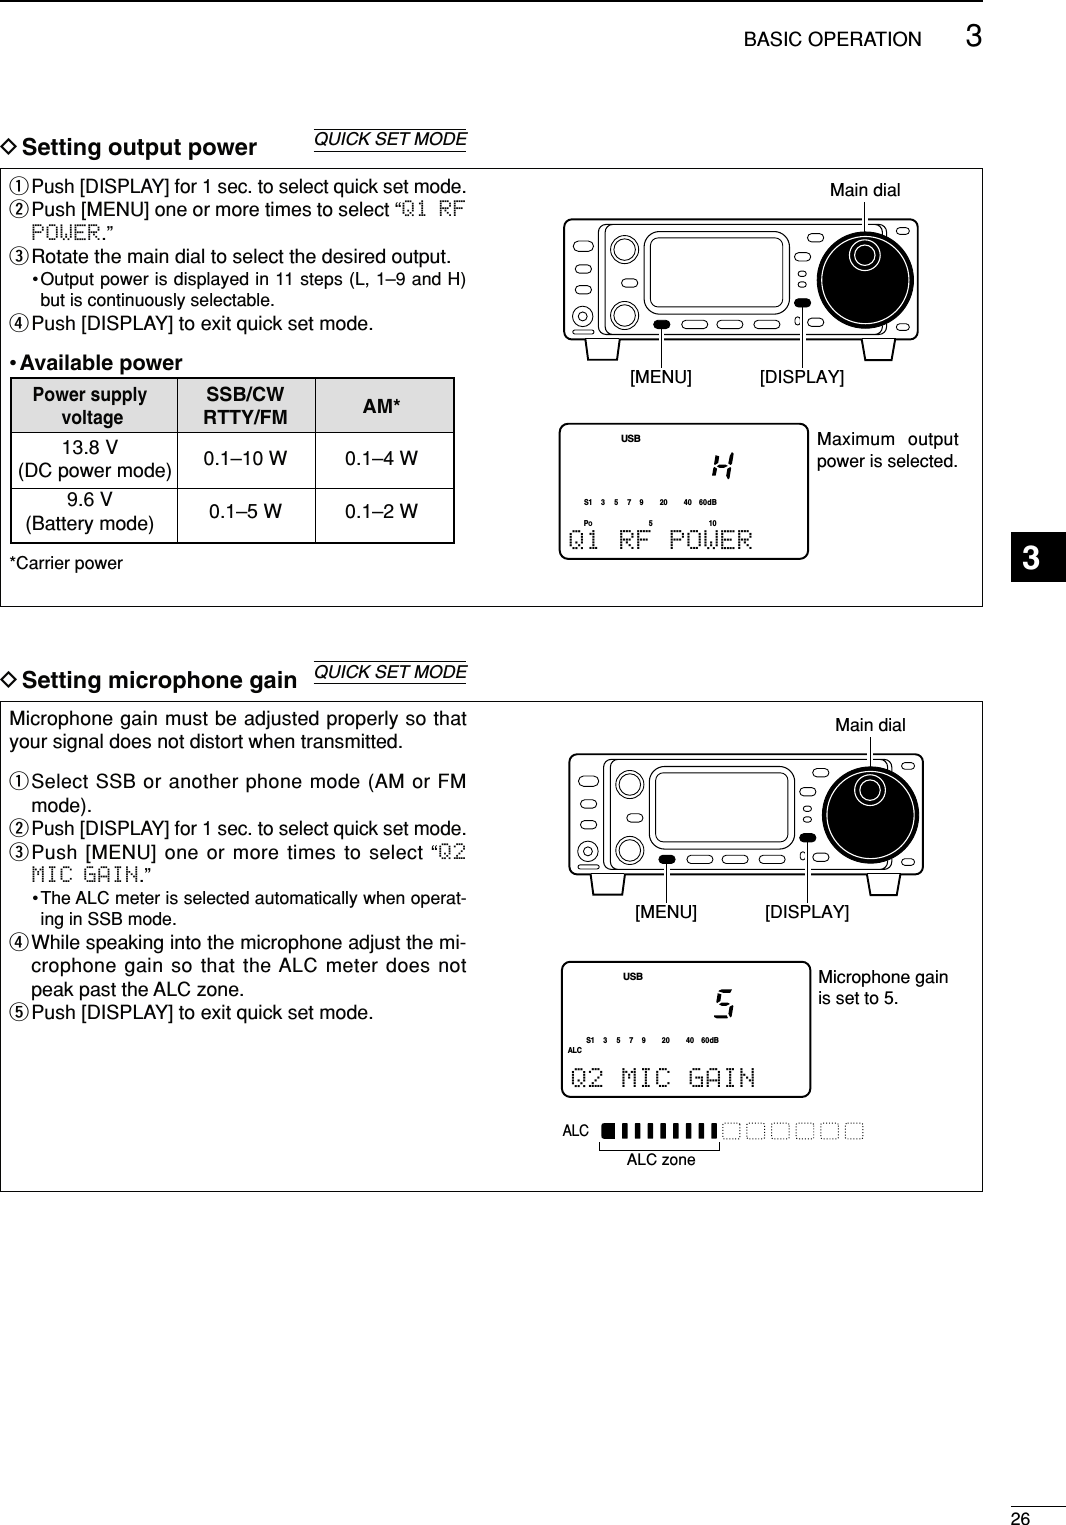 263BASIC OPERATIONqPush [DISPLAY] for 1 sec. to select quick set mode.wPush [MENU] one or more times to select “Q1 RFPOWER.”eRotate the main dial to select the desired output.•Output power is displayed in 11 steps (L, 1–9 and H)but is continuously selectable.rPush [DISPLAY] to exit quick set mode.•Available power*Carrier powerPOS15537920 401060dBUSBQ1 RF POWERMaximum output power is selected.[DISPLAY]Main dial[MENU]DSetting output powerMicrophone gain must be adjusted properly so thatyour signal does not distort when transmitted.qSelect SSB or another phone mode (AM or FMmode).wPush [DISPLAY] for 1 sec. to select quick set mode.ePush [MENU] one or more times to select “Q2MIC GAIN.”•The ALC meter is selected automatically when operat-ing in SSB mode.rWhile speaking into the microphone adjust the mi-crophone gain so that the ALC meter does notpeak past the ALC zone.tPush [DISPLAY] to exit quick set mode.ALCALC zoneALCS1 537920 40 60dBUSBQ2 MIC GAINMicrophone gain is set to 5.[DISPLAY]Main dial[MENU]DSetting microphone gainQUICK SET MODEPower supplySSB/CW AM*voltageRTTY/FM13.8 V 0.1–10 W 0.1–4 W(DC power mode)9.6 V 0.1–5 W 0.1–2 W(Battery mode)QUICK SET MODE3